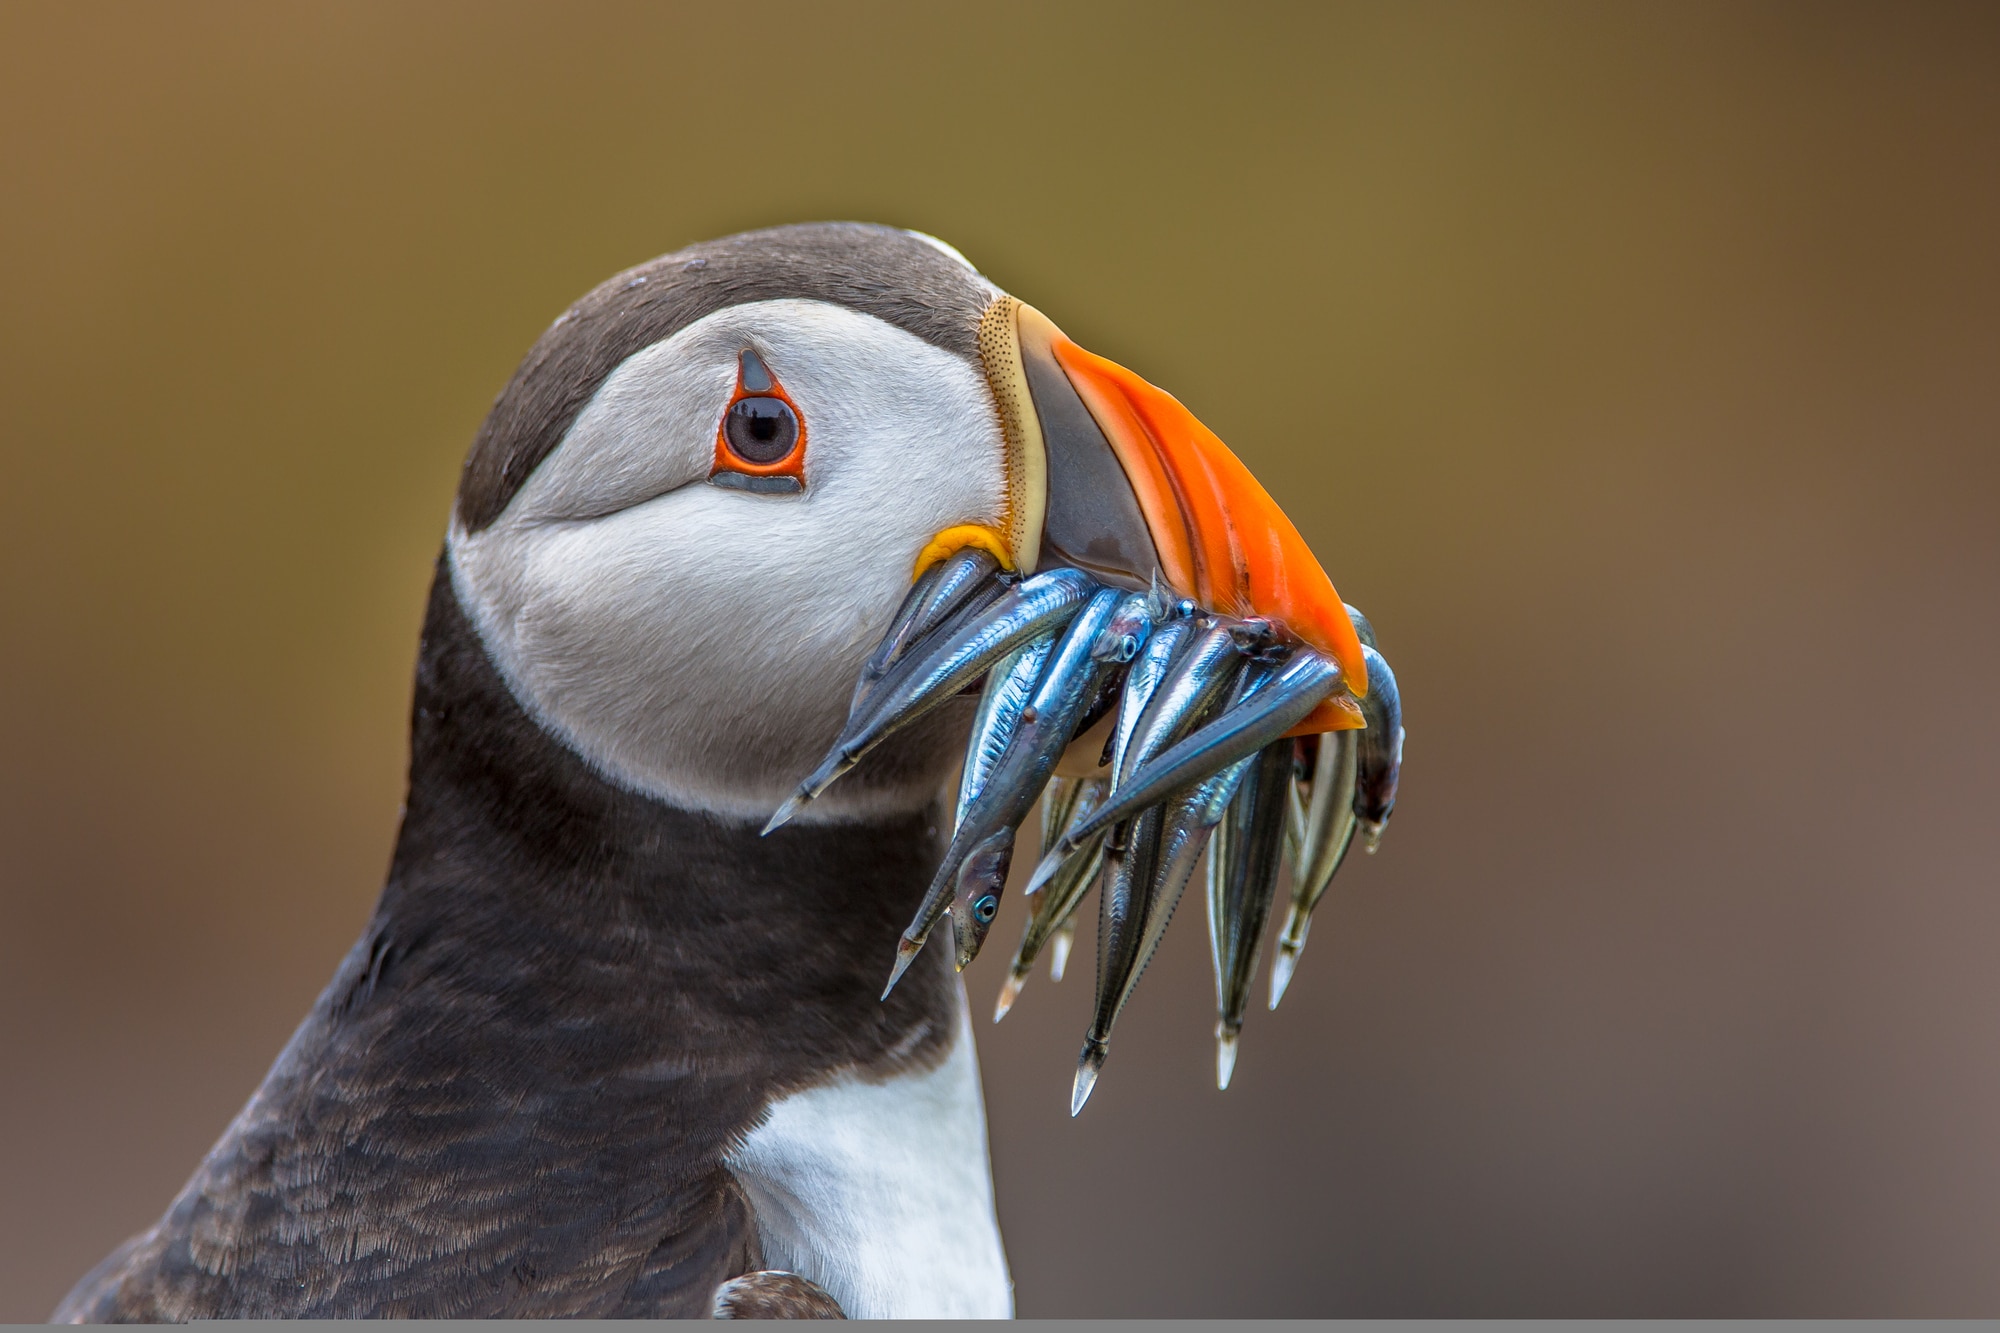 Puffin with beak full of eelsPuffin with beak full of eels